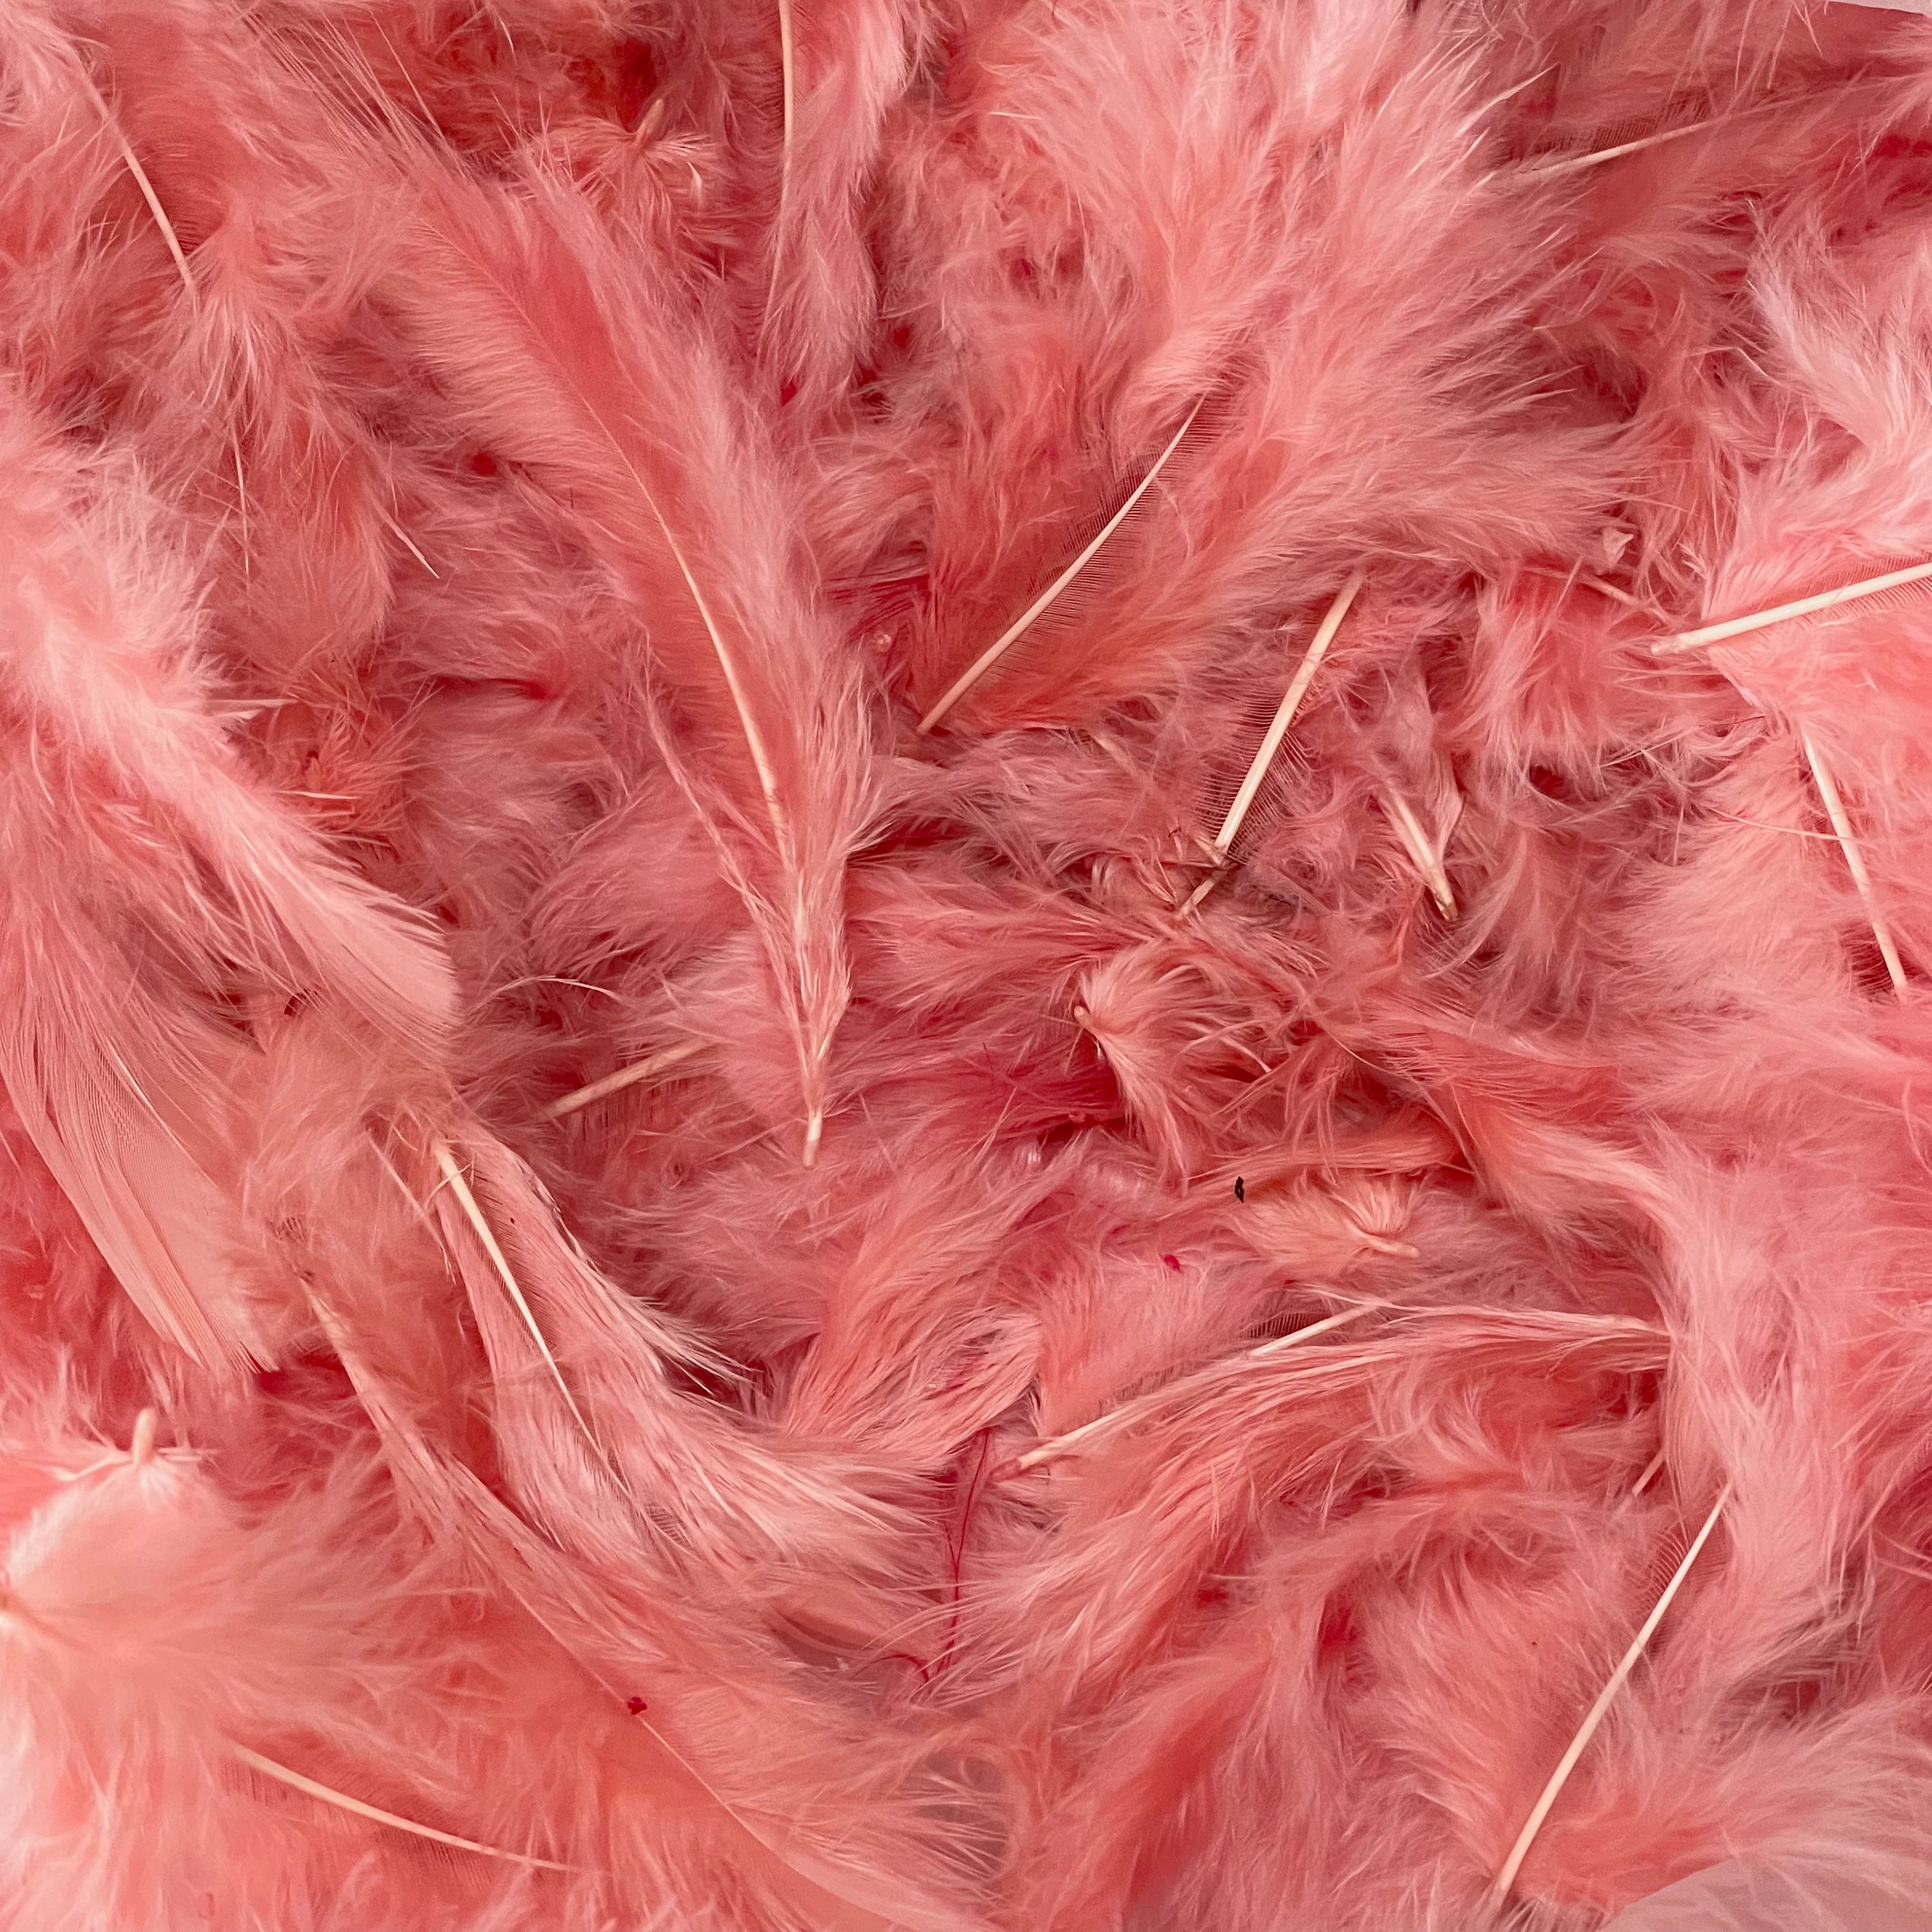 Fluffy Marabou Feather Plumage Pack 10 grams - Dusty Pink